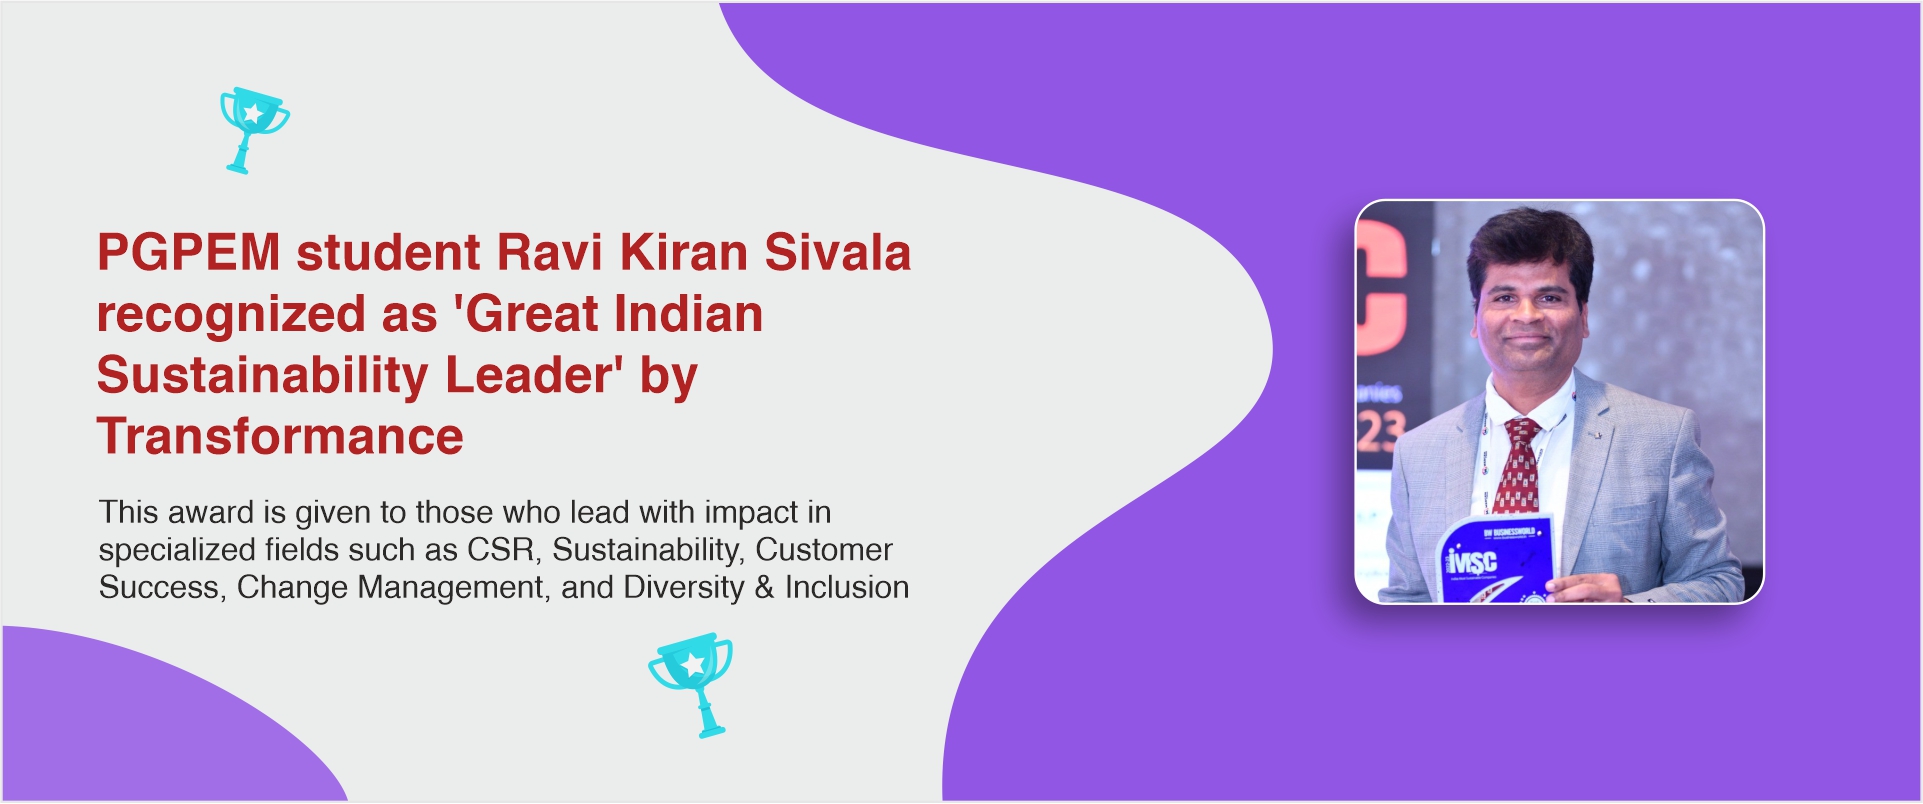 PGPEM student Ravi Kiran Sivala recognized as ‘Great Indian Sustainability Leader’ by Transformance